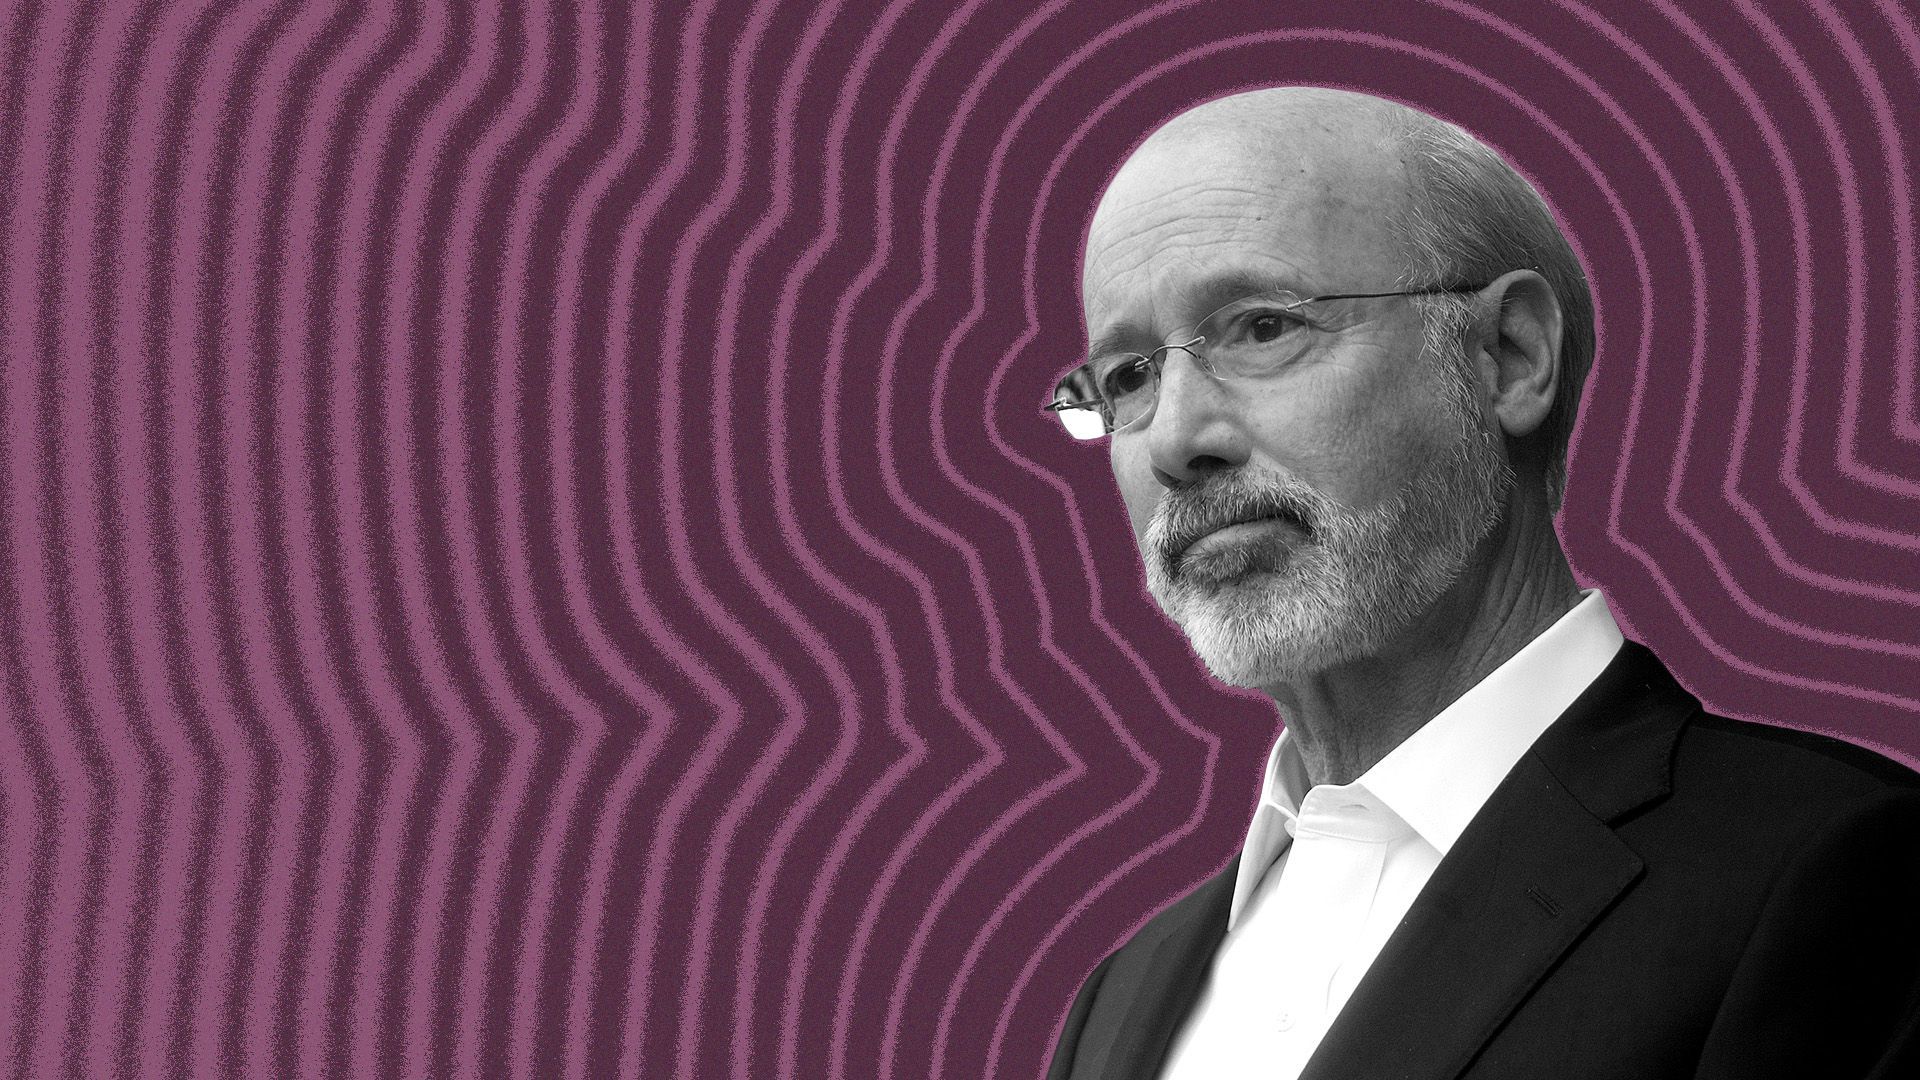 Photo illustration of Philadelphia Governor Tom Wolf with lines radiating from him.